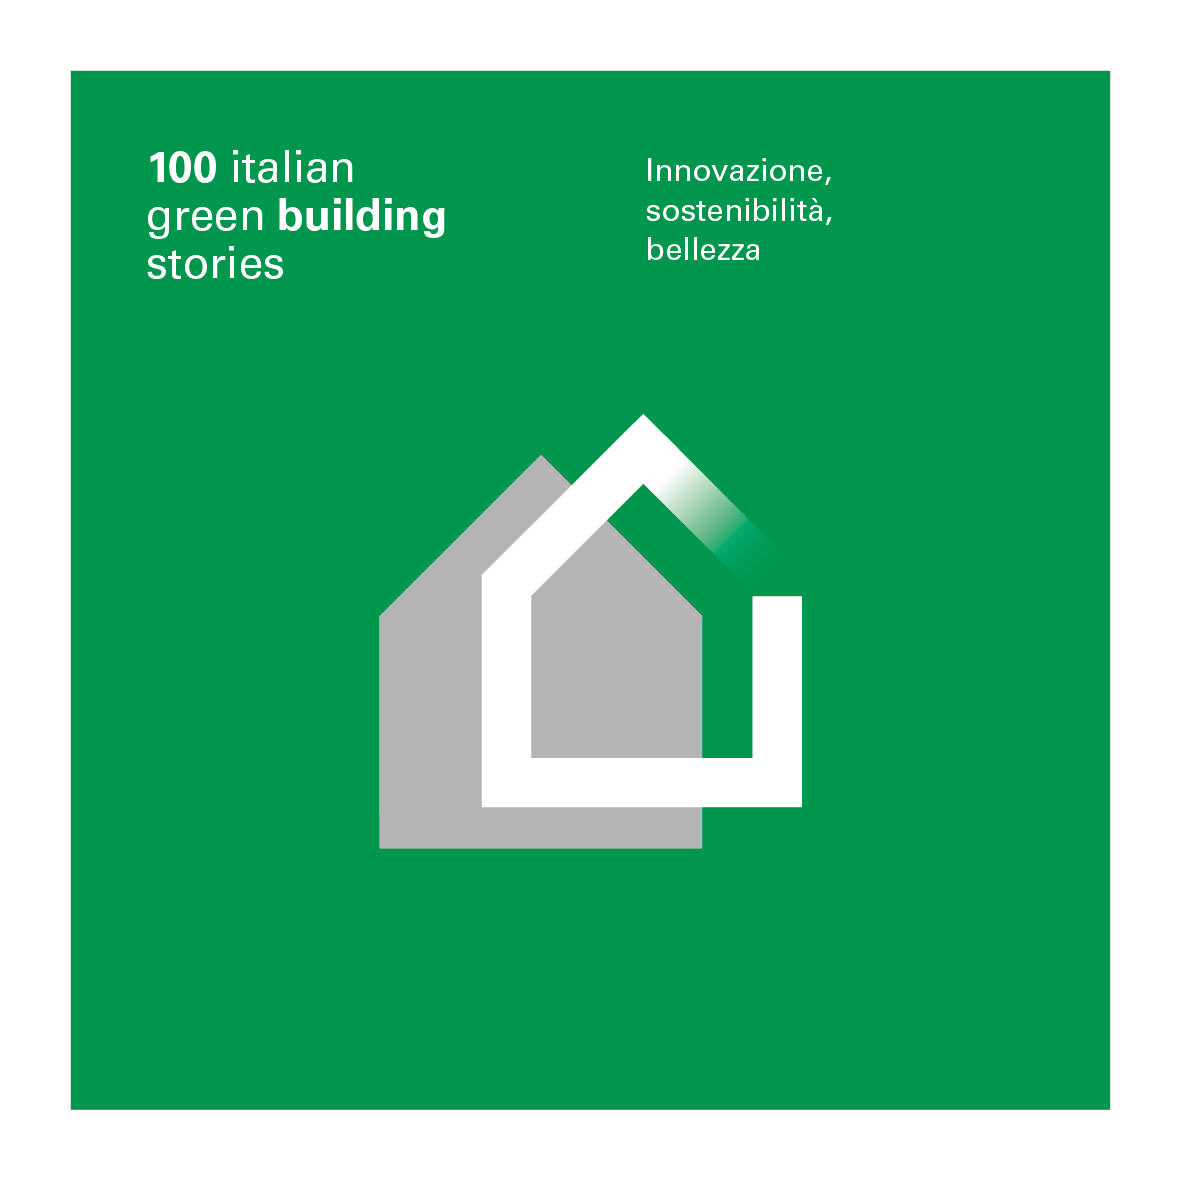 SYMBOLA REPORT, DIASEN AMONG THE EXCELLENCES OF SUSTAINABLE CONSTRUCTION